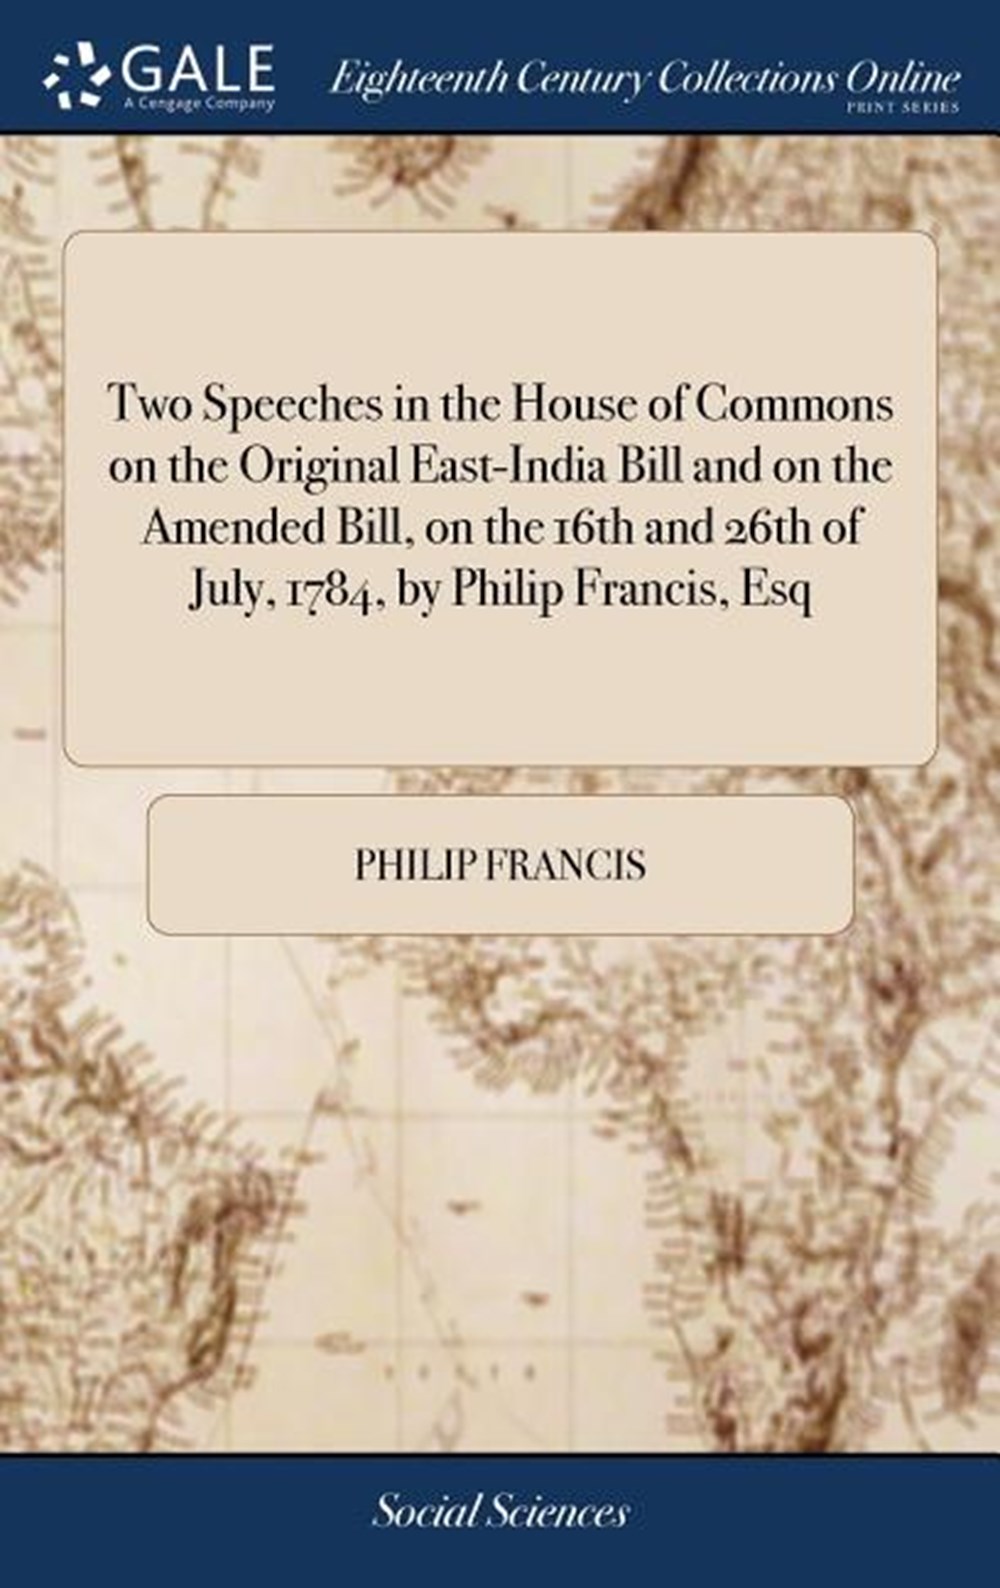 Two Speeches in the House of Commons on the Original East-India Bill and on the Amended Bill, on the